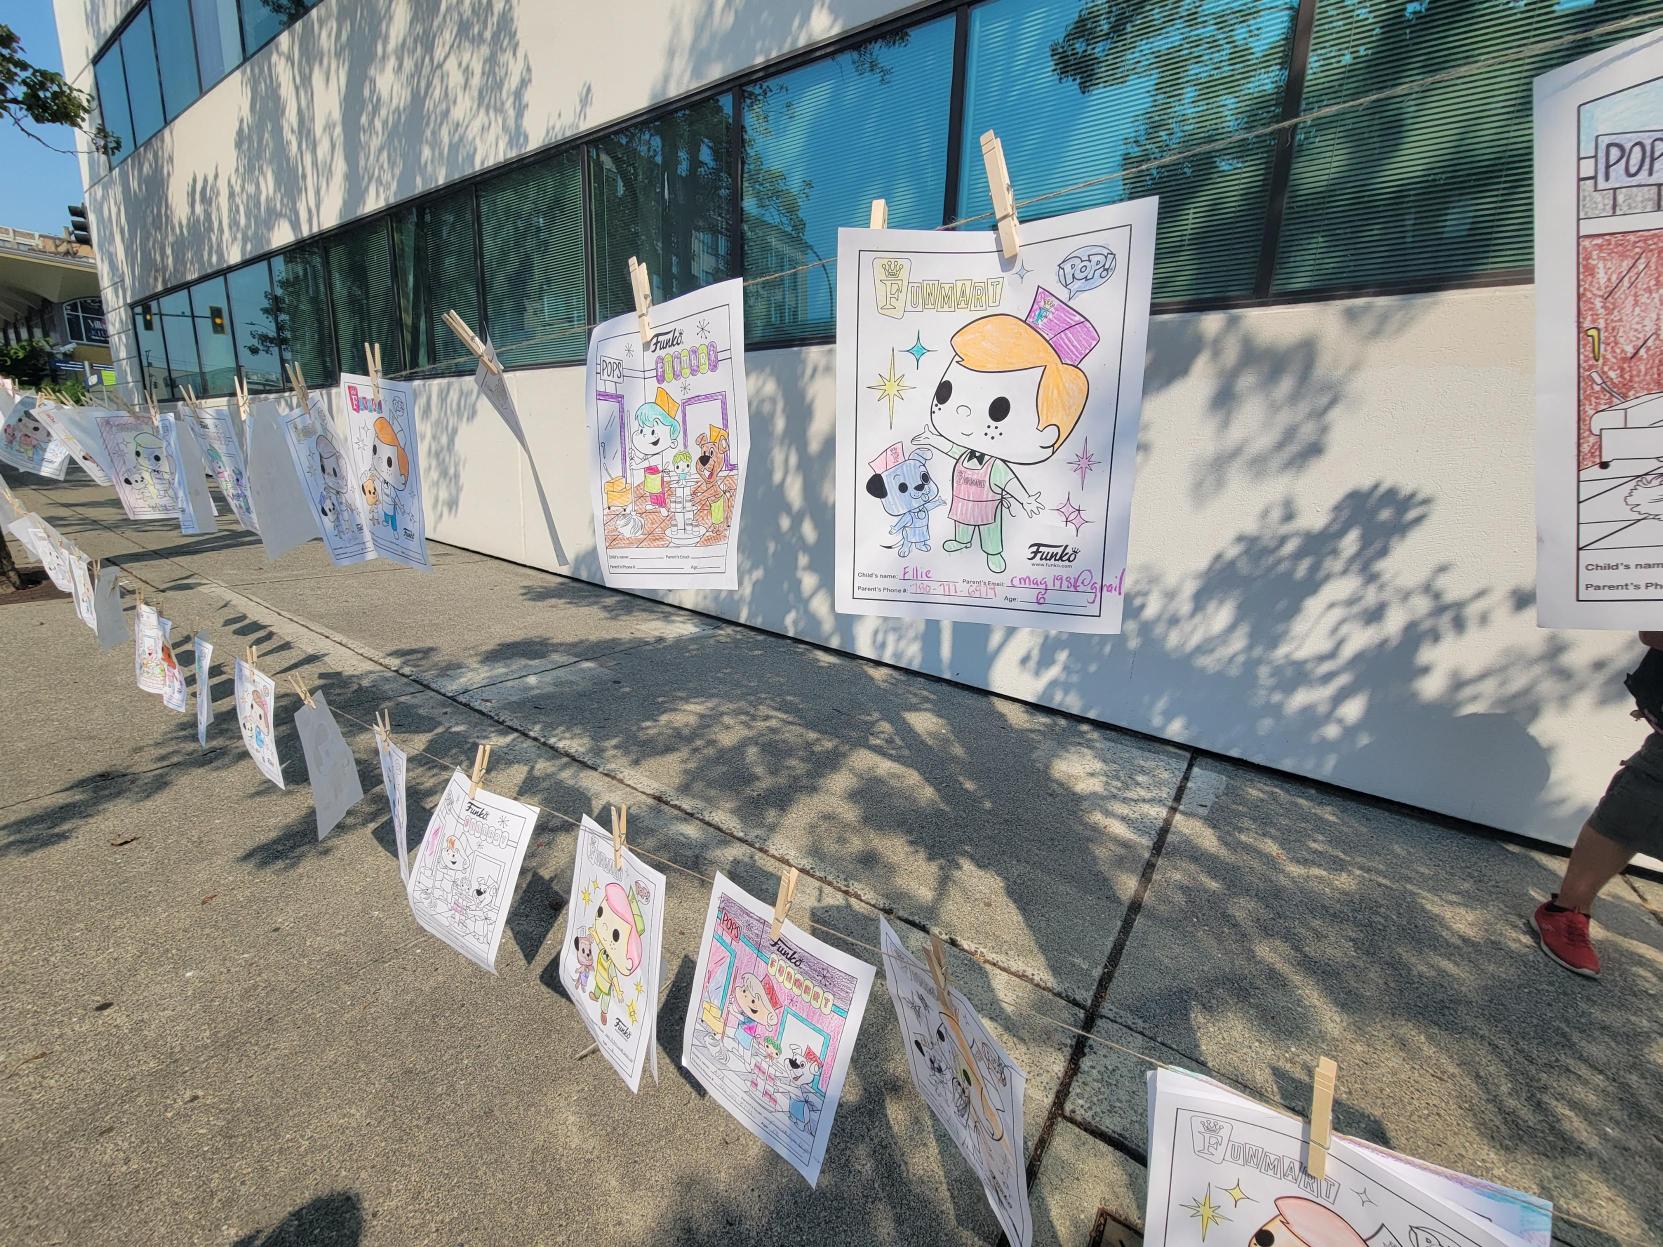 Coloring Pages: Various coloring pages hang on display in the street. The coloring pages feature Freddy Funko.